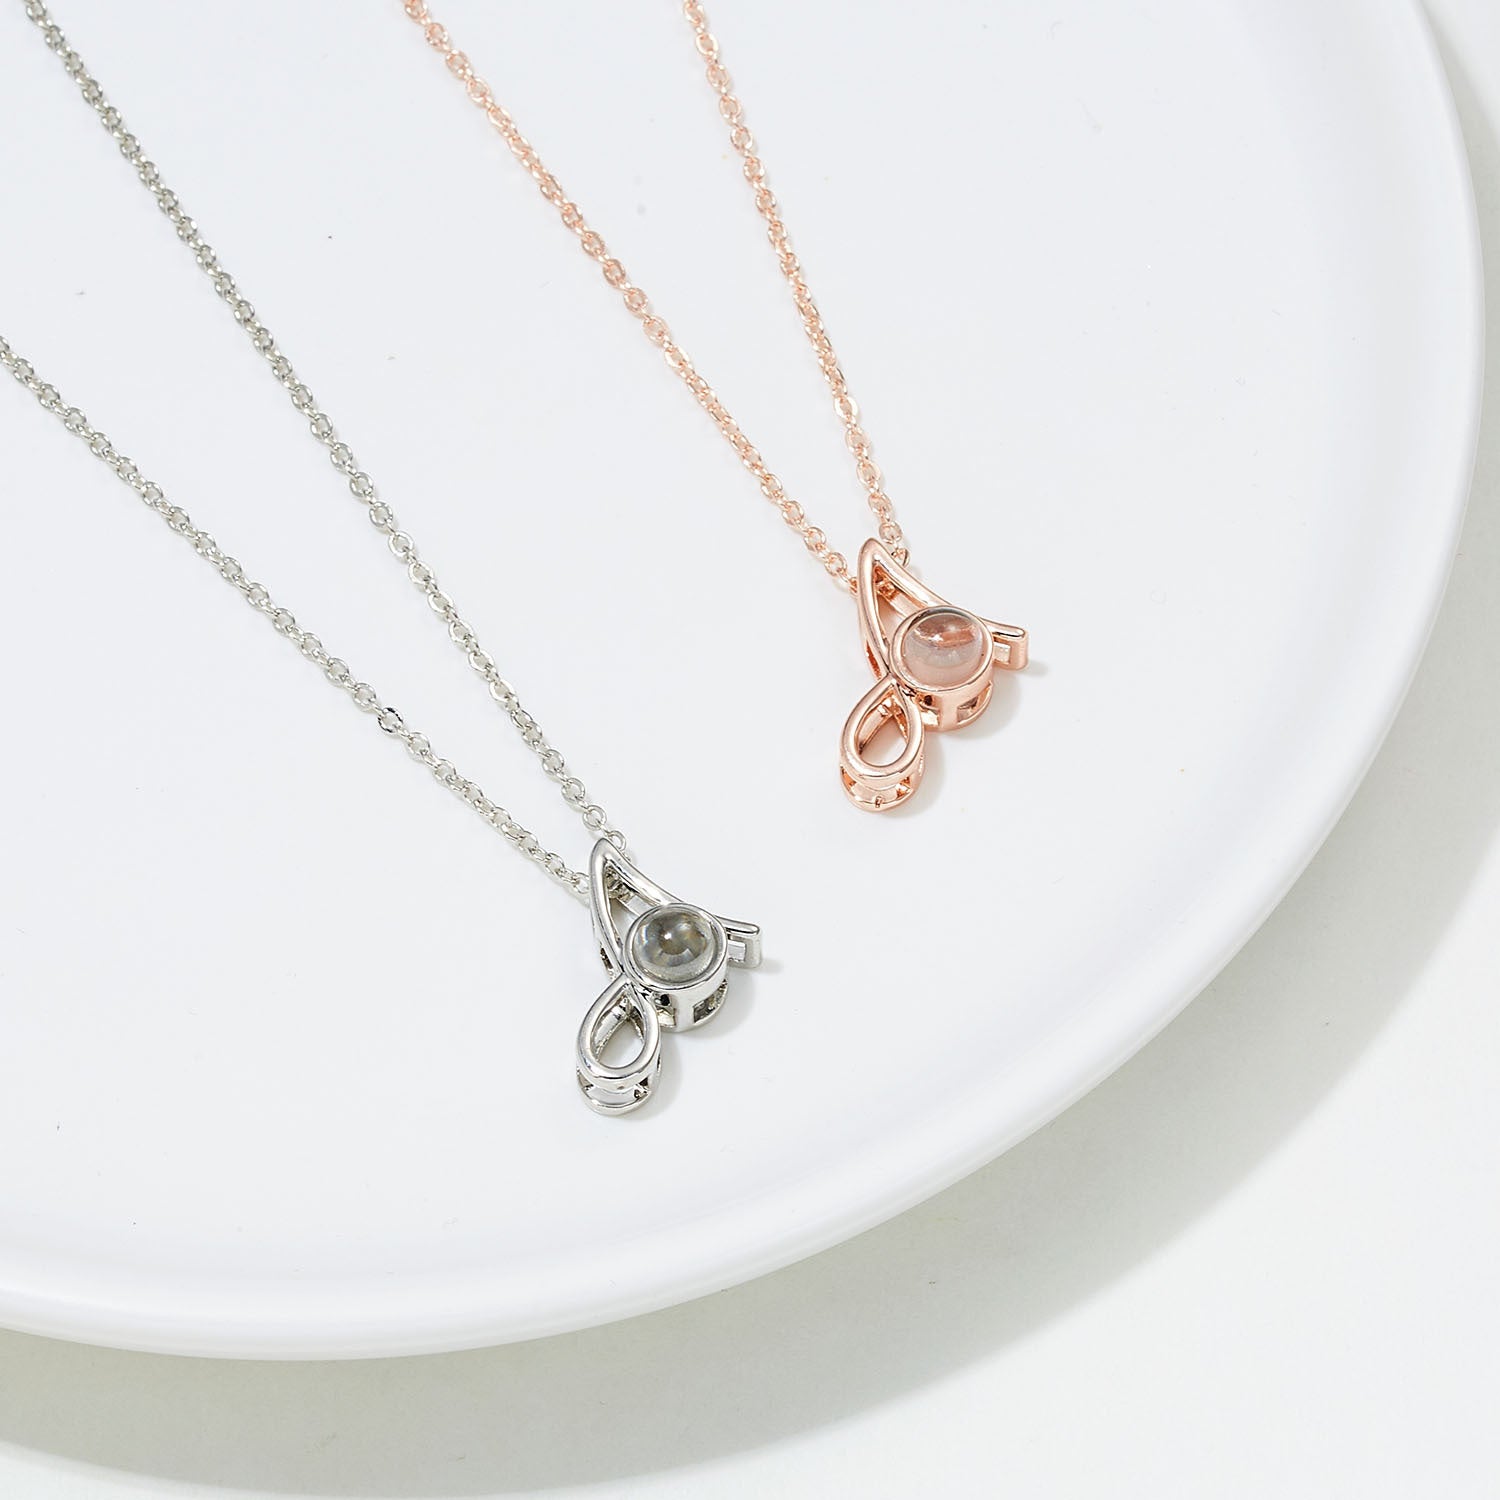 Personalized Initial Monogram Photo Projection Necklace